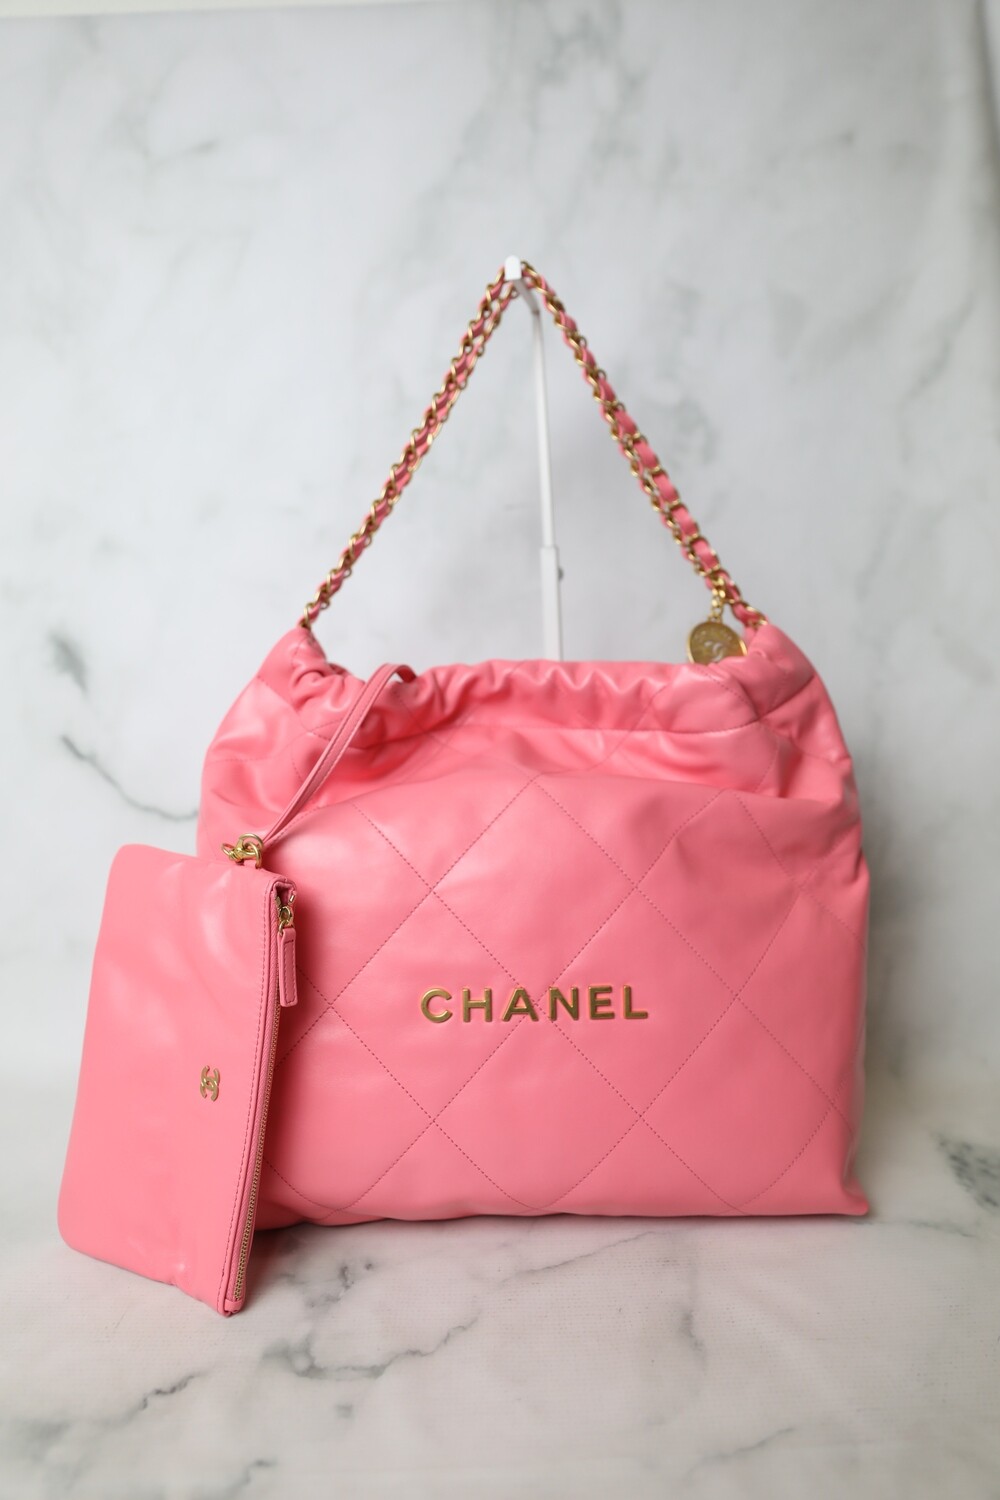 Chanel 22 Medium Quilted Hobo Tote, Pink Calfskin with Gold Hardware, New  in Box WA001